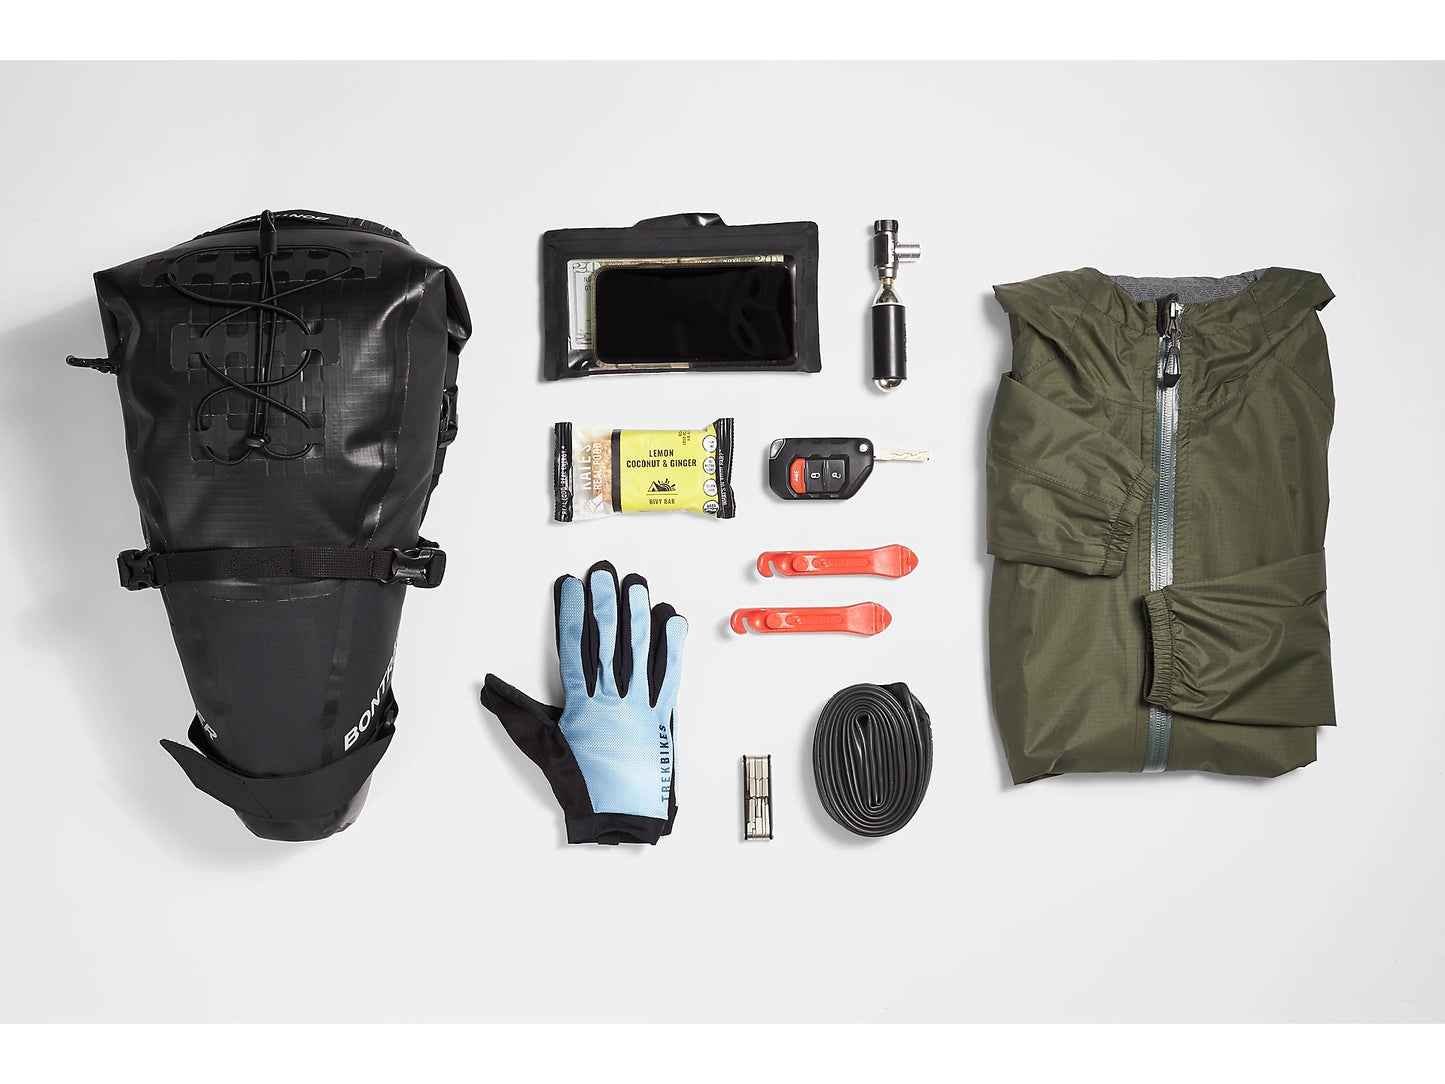 Bontrager Adventure Saddle Bag accessories to show how much can fit in with a white background